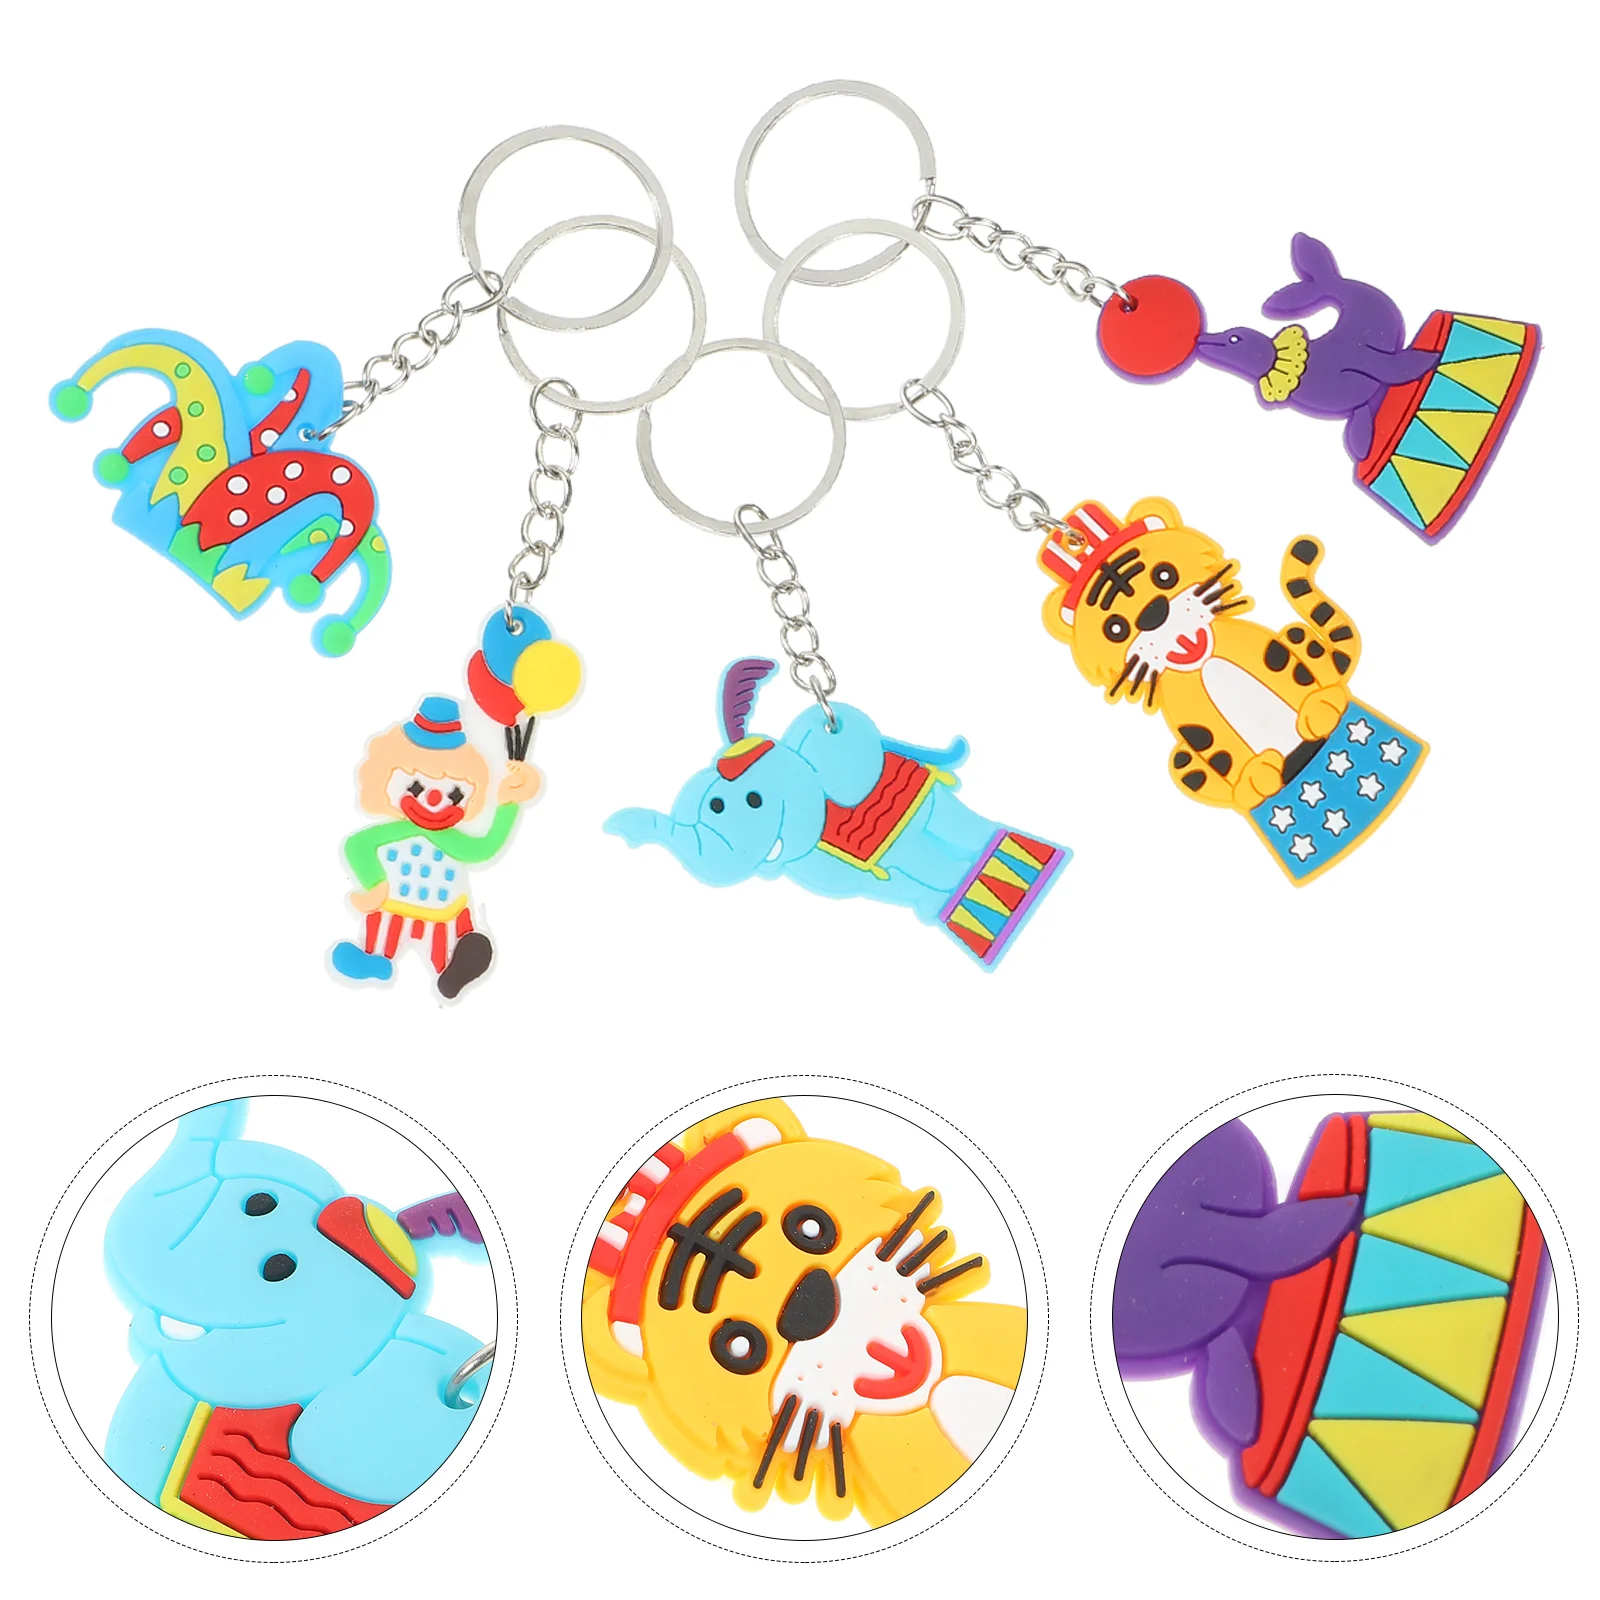 

20 Pcs Car Key Chain Miss Gifts Carnival Theme Party Decorations Pvc Keychains for Women